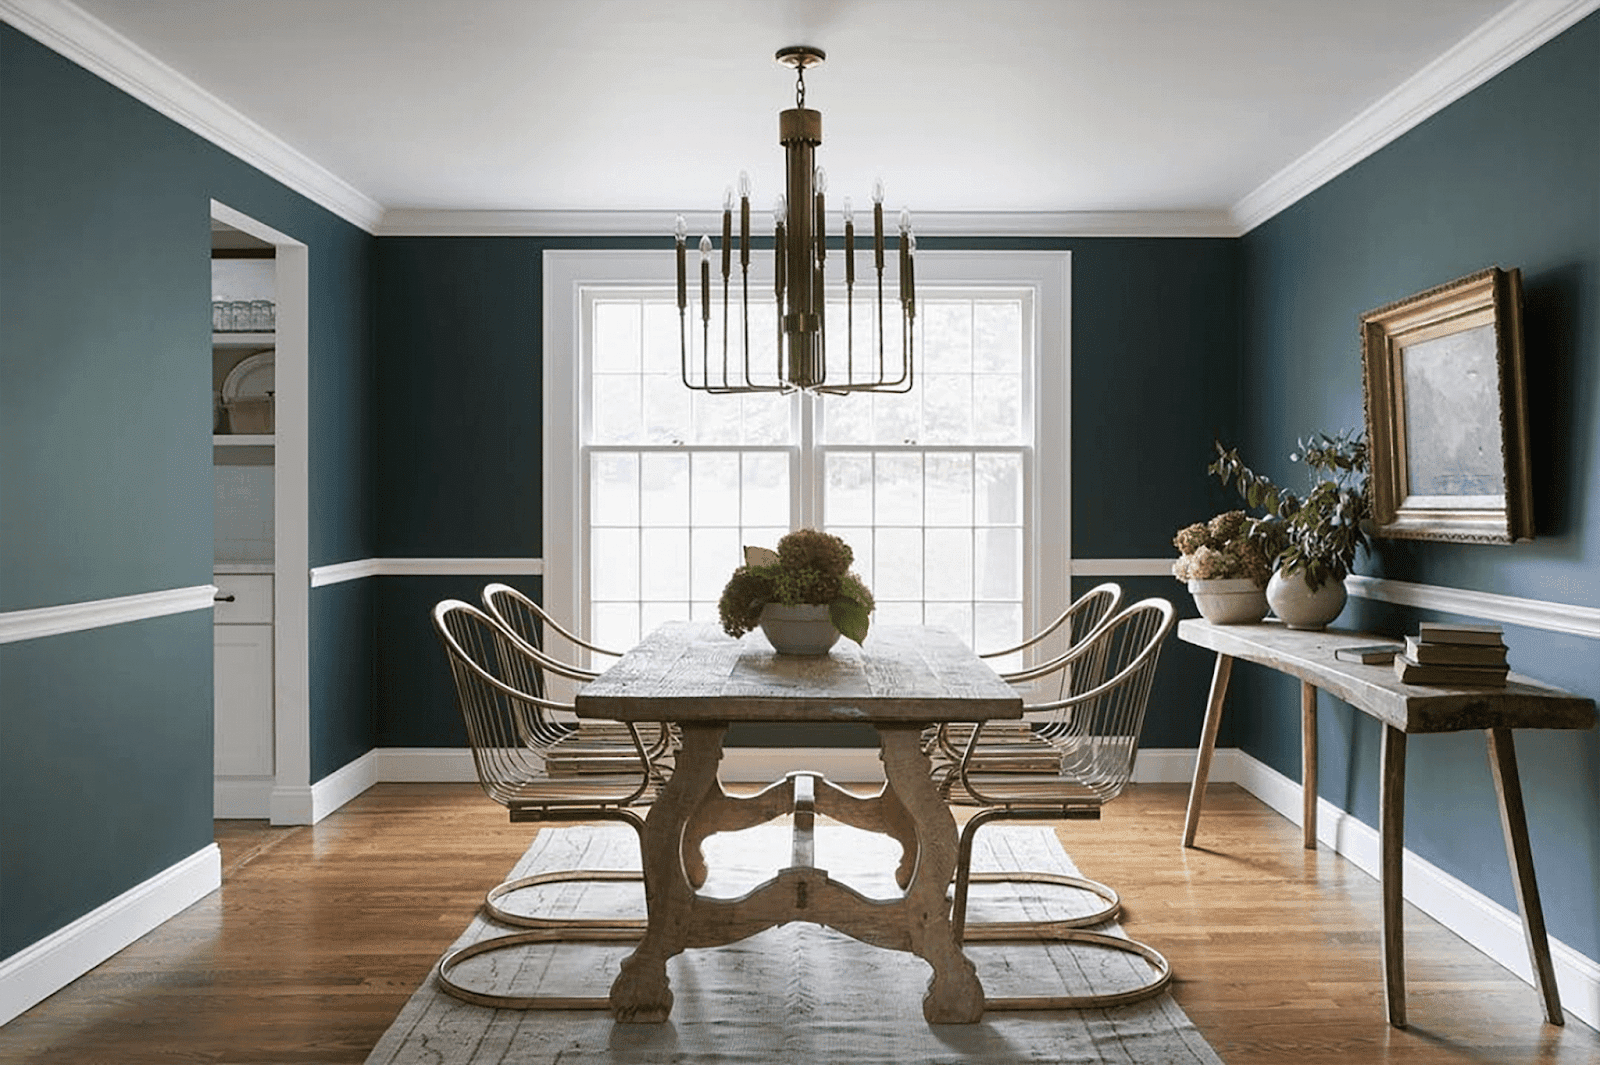 How To Make The Most Of Your Chair Rail, Color Ideas For Dining Room With Chair Rail